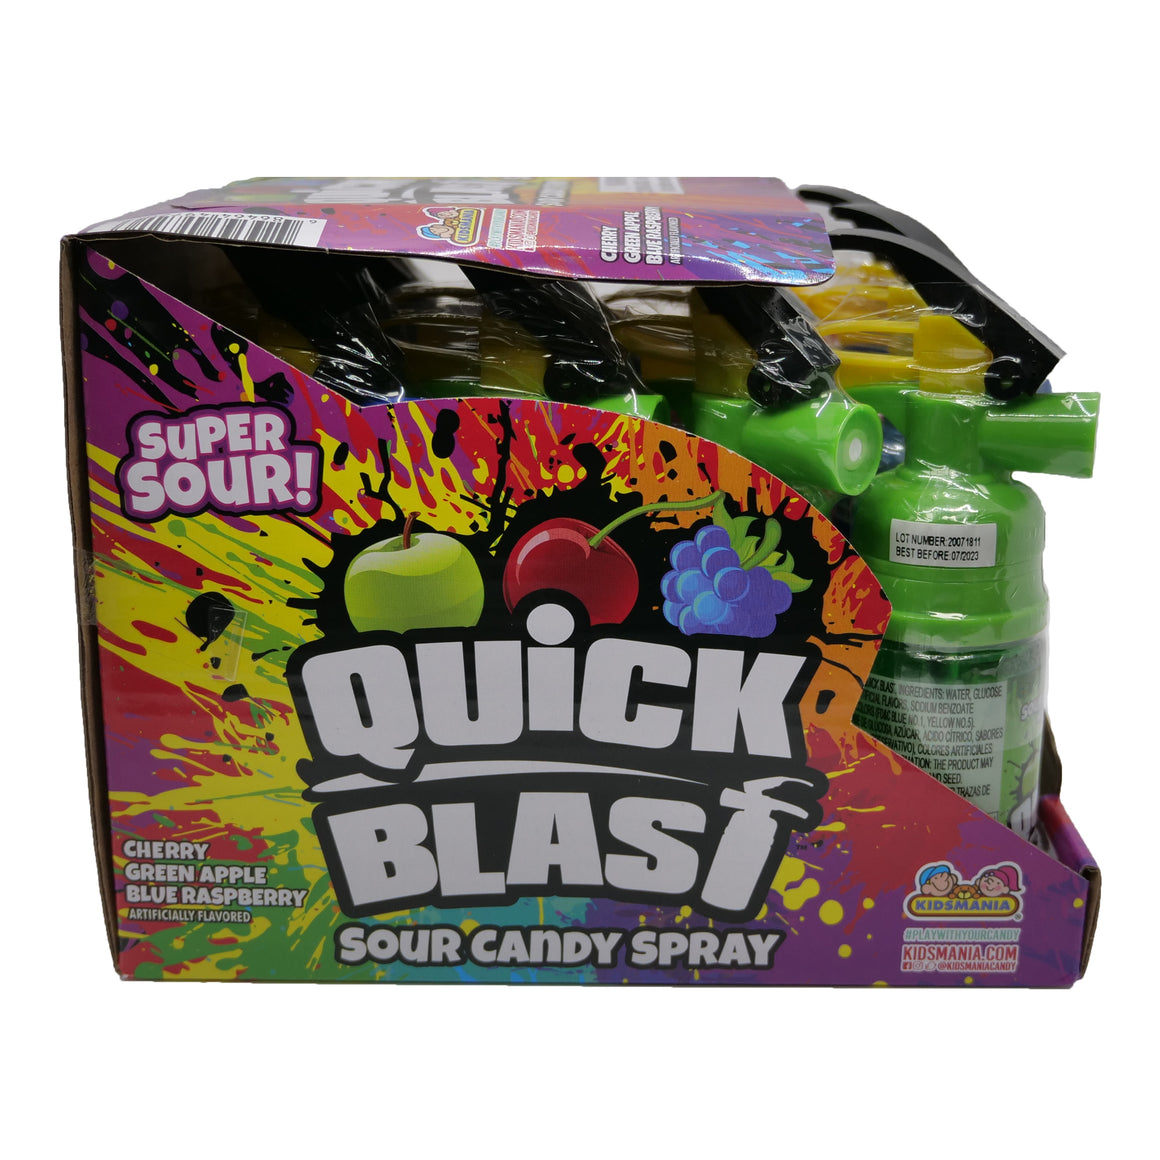 All City Candy Quick Blast Sour Candy Spray - 2.05-oz. Bottle 1 Bottle Novelty Kidsmania For fresh candy and great service, visit www.allcitycandy.com